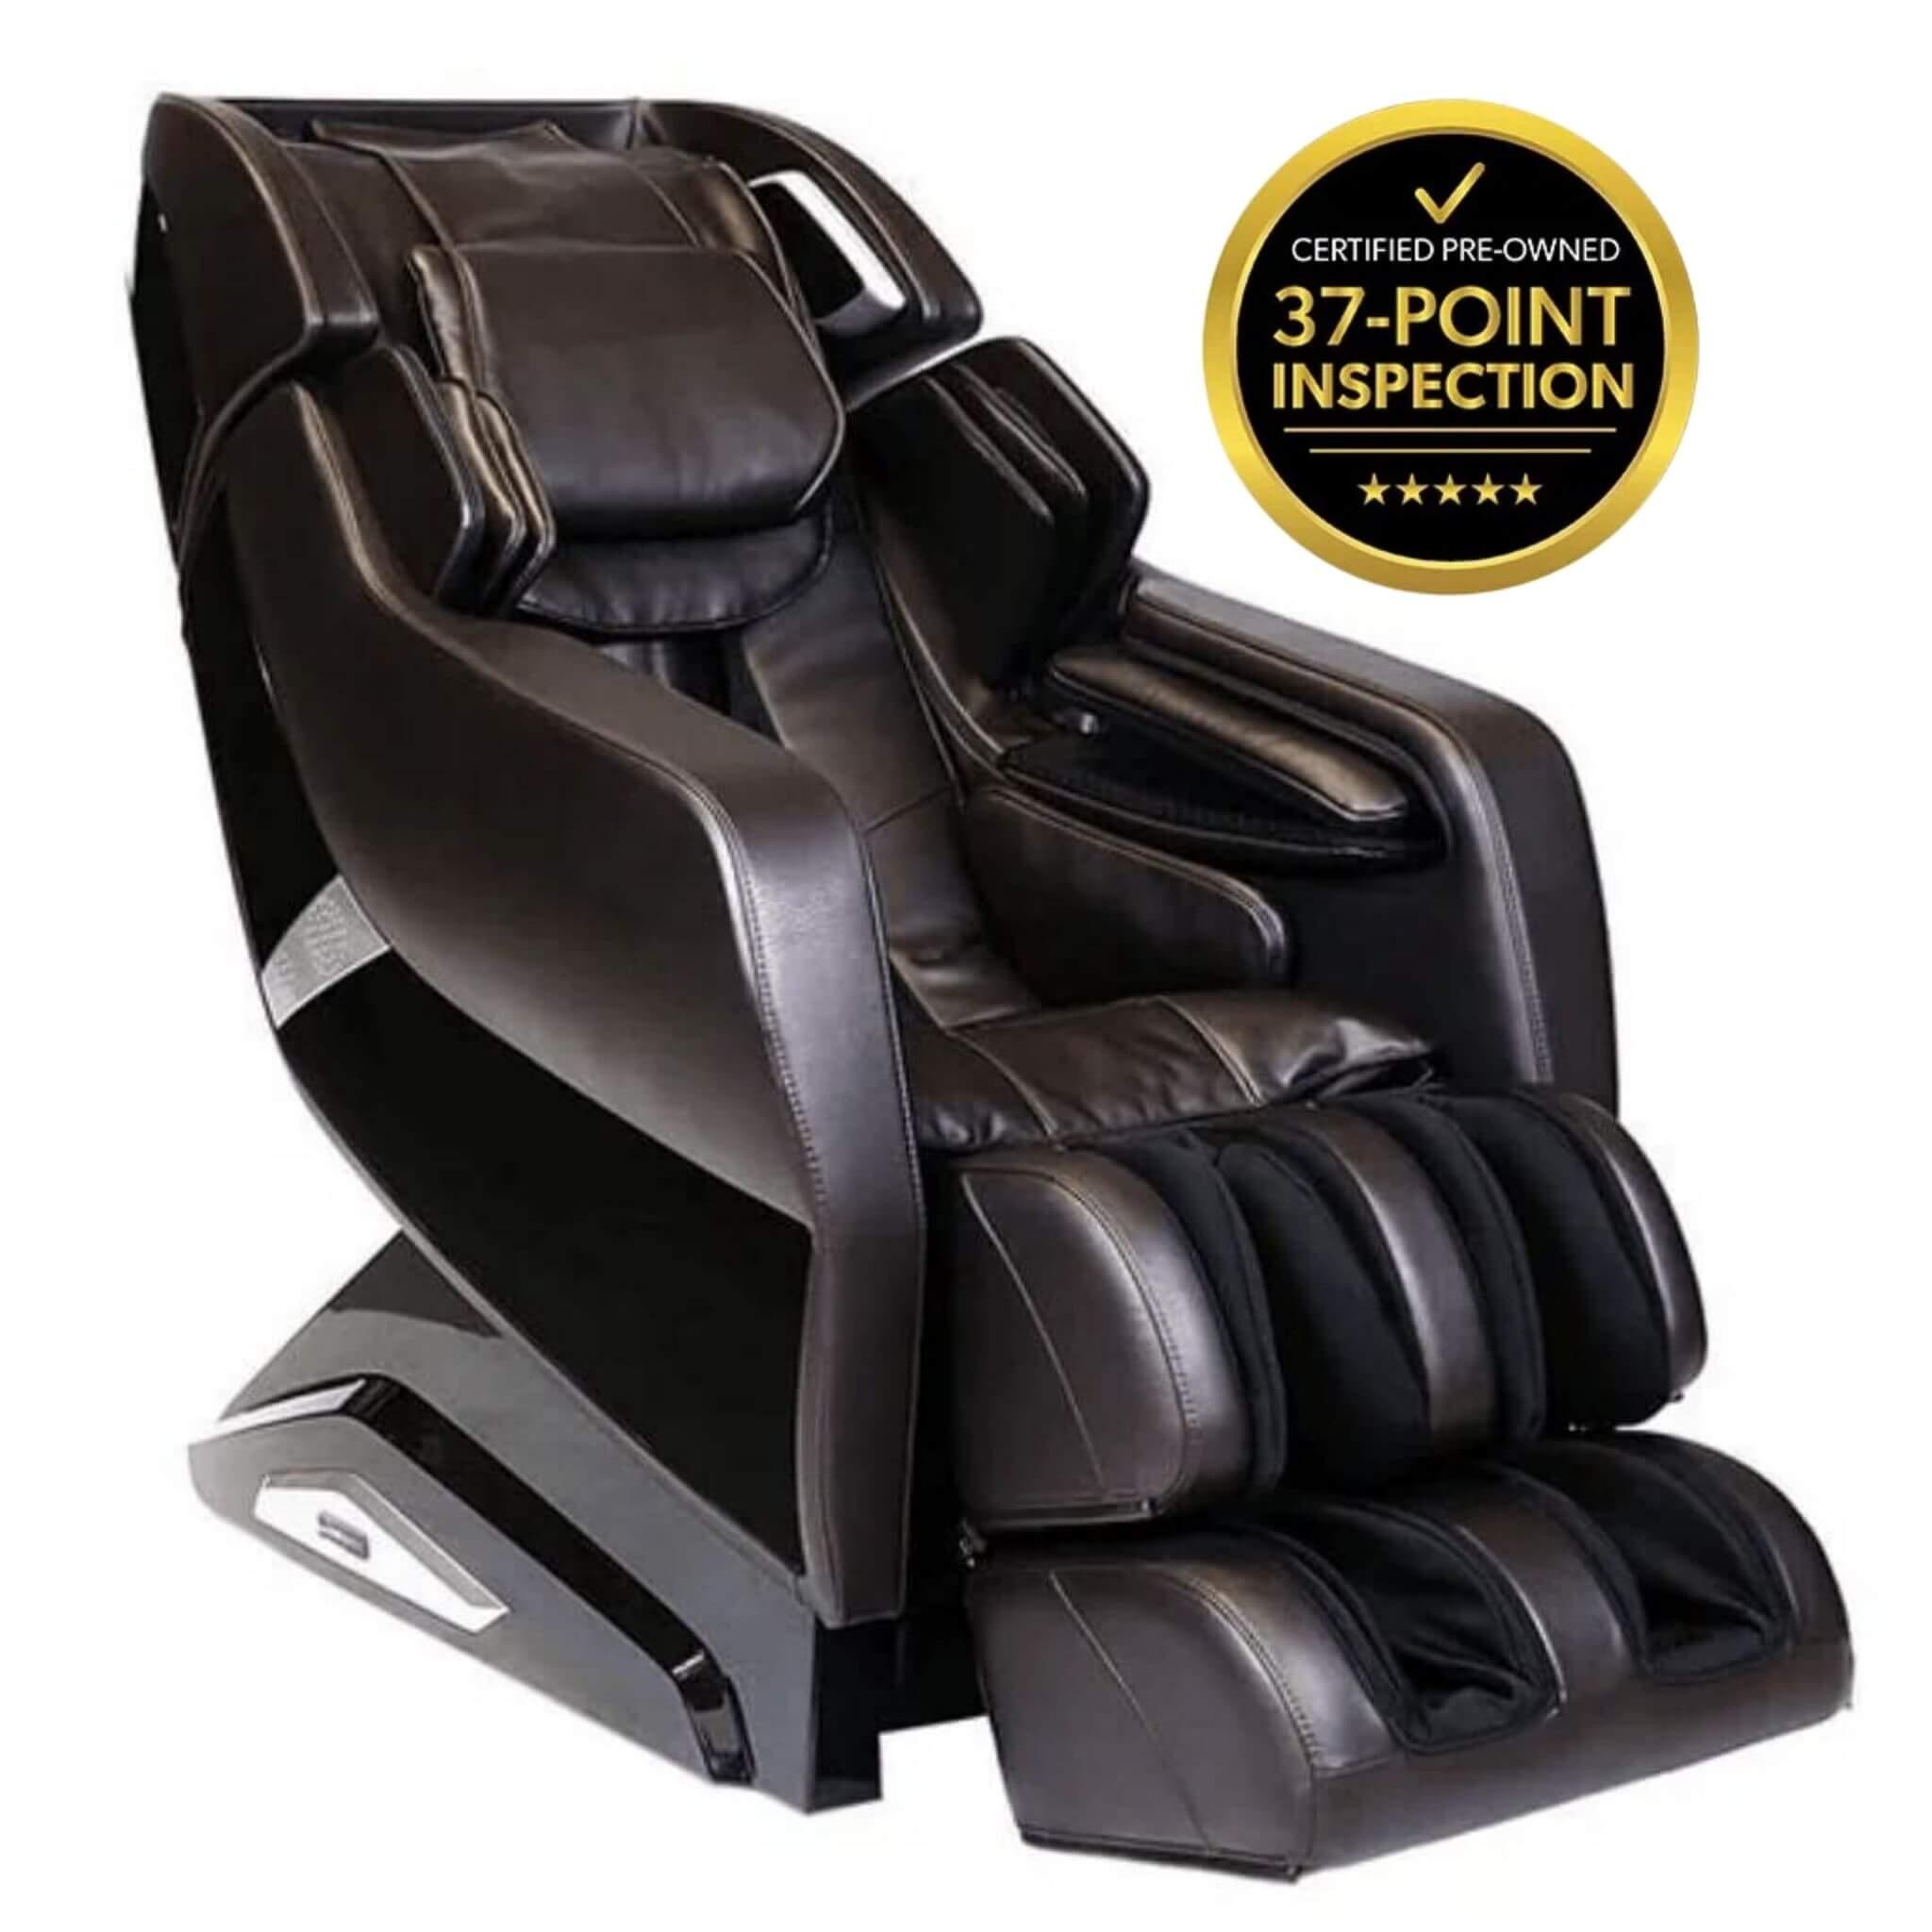 Infinity Celebrity 3D/4D Massage Chair | Certified Pre-Owned (Grade A) - 96720004_Grd A - Health & Beauty > Massage & Relaxation > Massage Chairs at zebramassagechairs.com